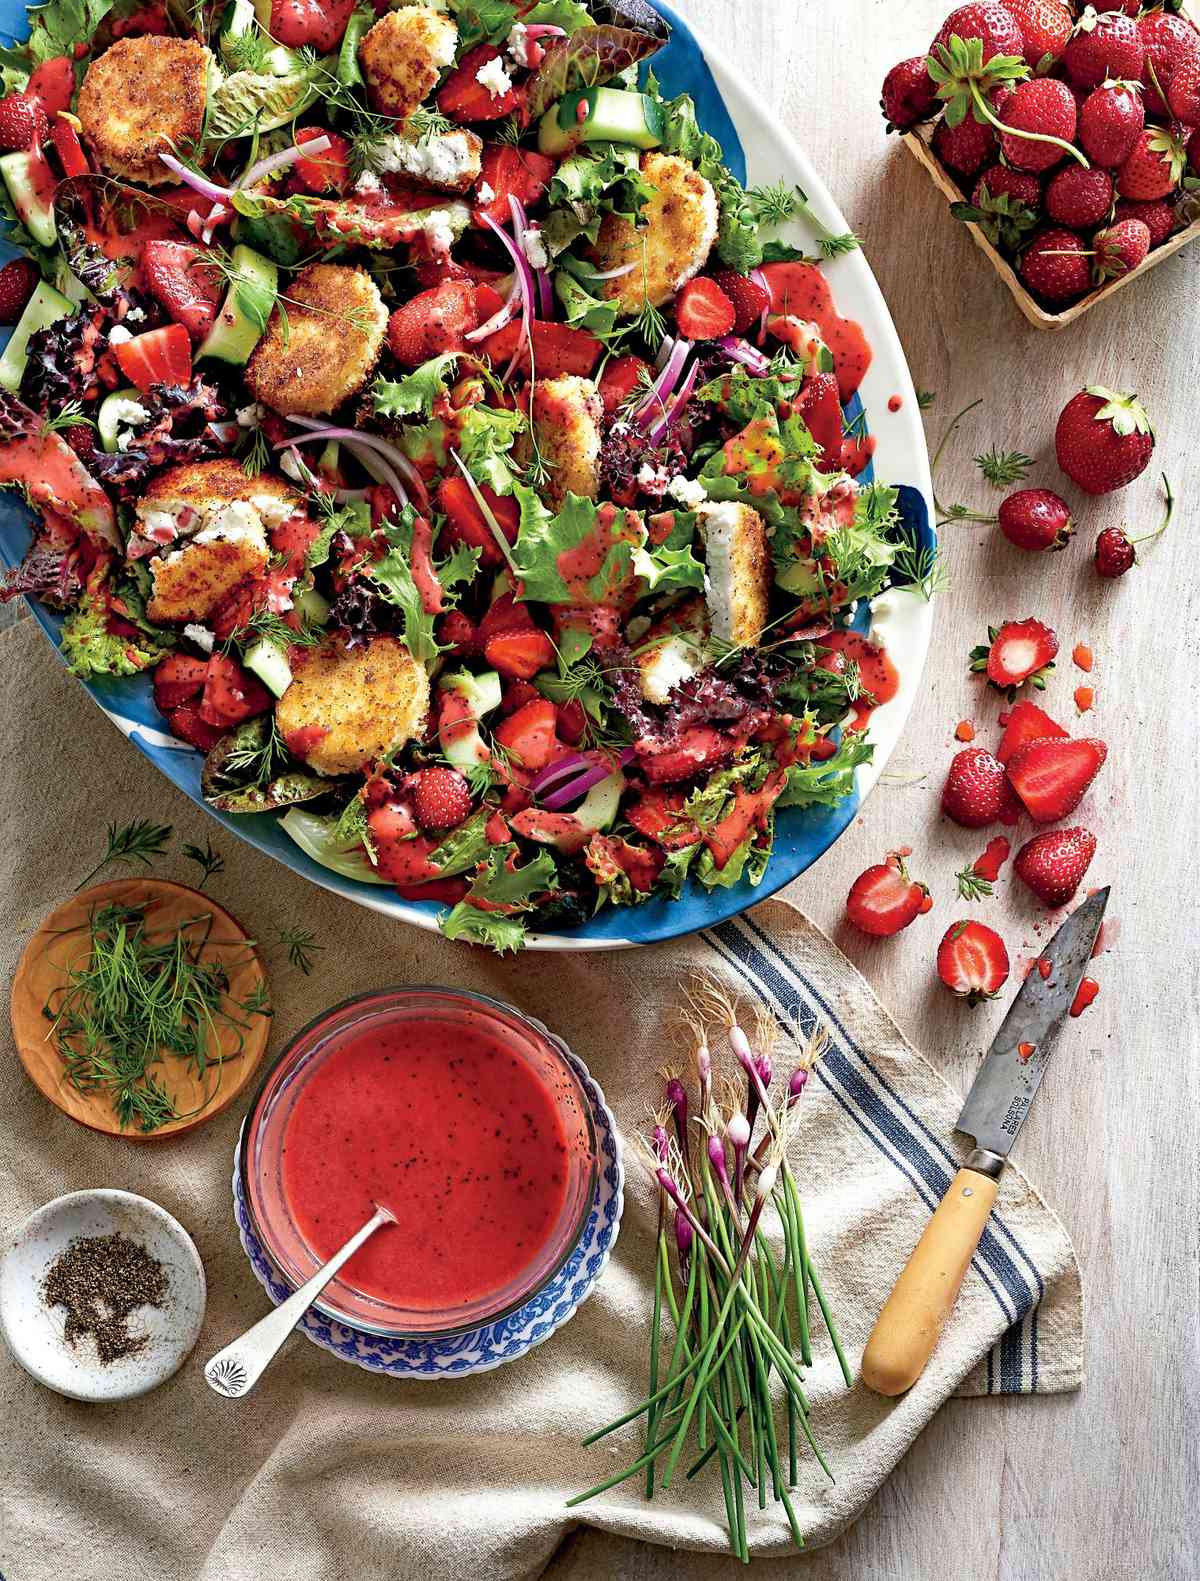 Strawberry Salad with Warm Goat Cheese Croutons